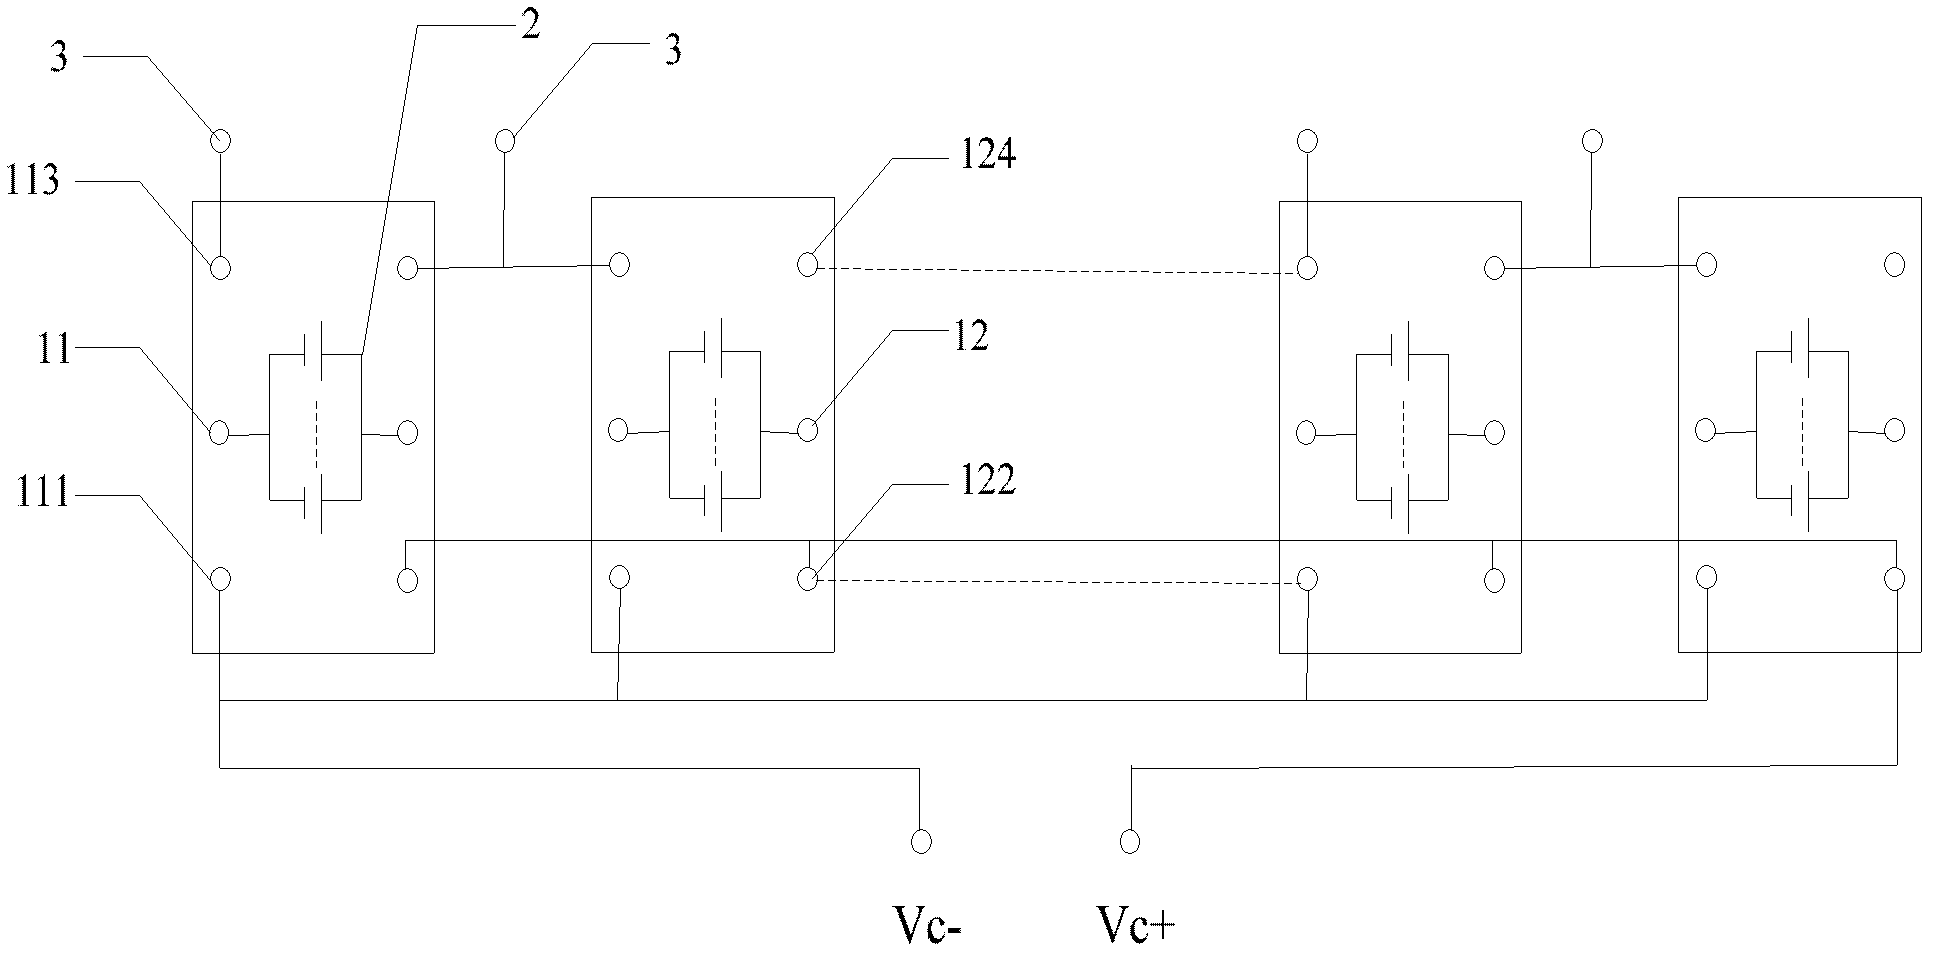 Cell box charging system and cell box power system